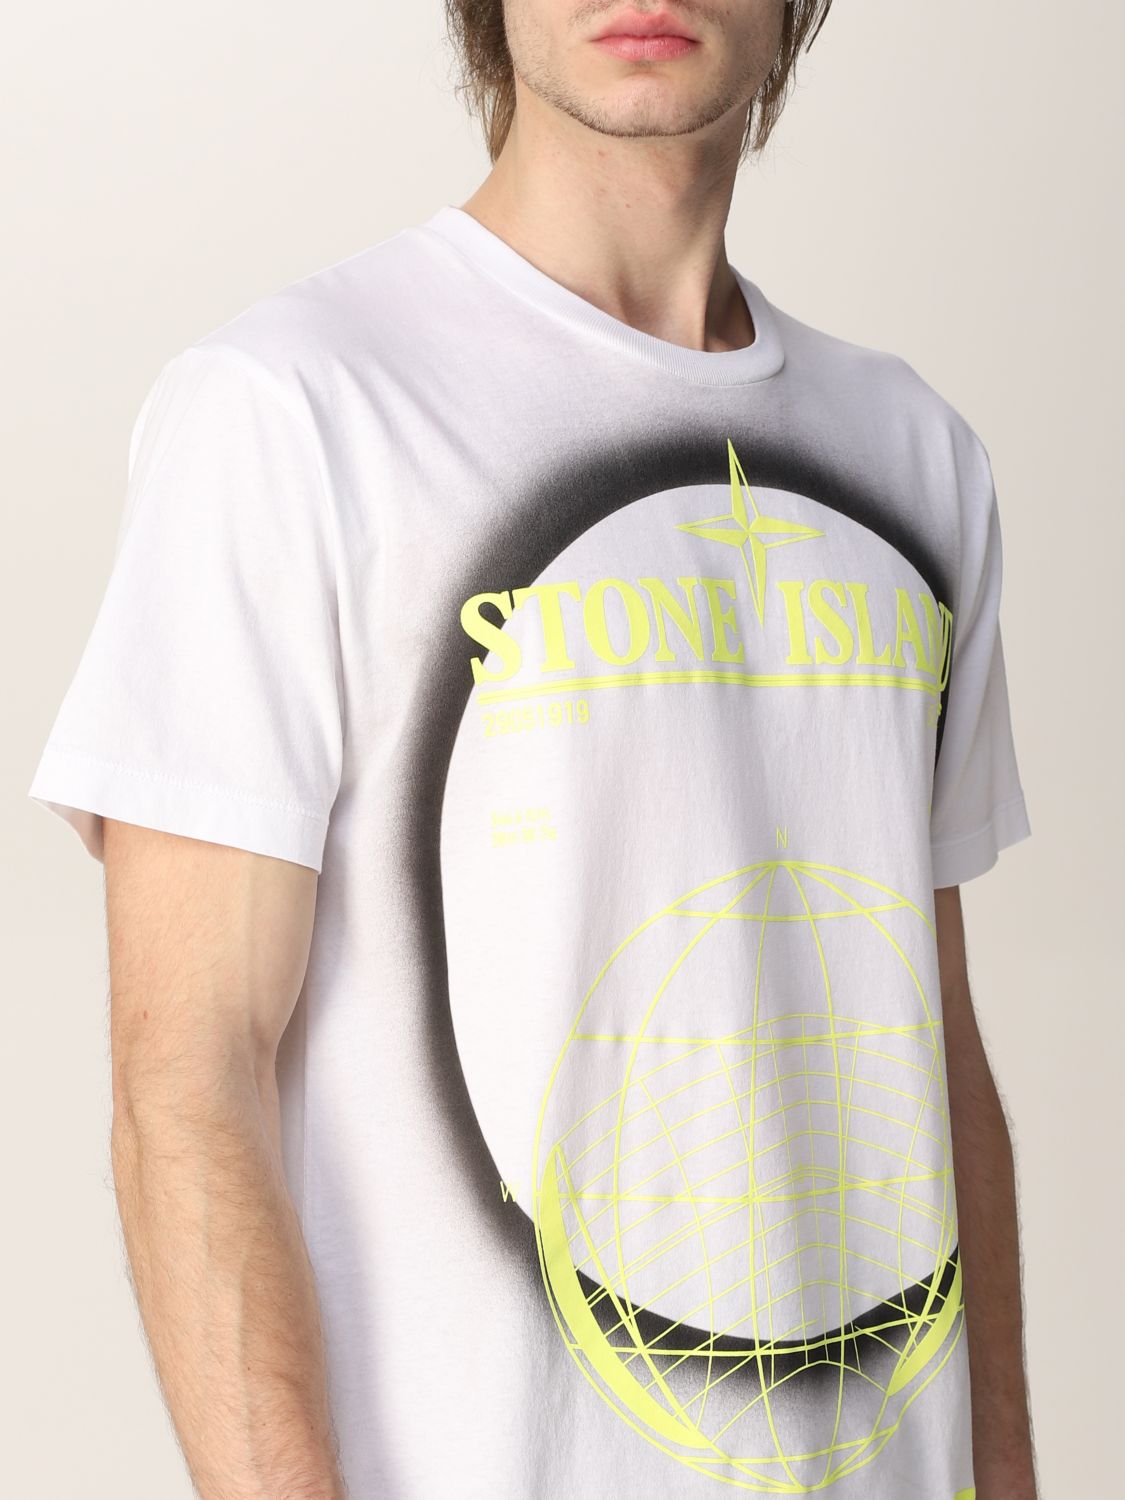 STONE ISLAND: T-shirt with eclipse print - White | Stone Island t-shirt ...